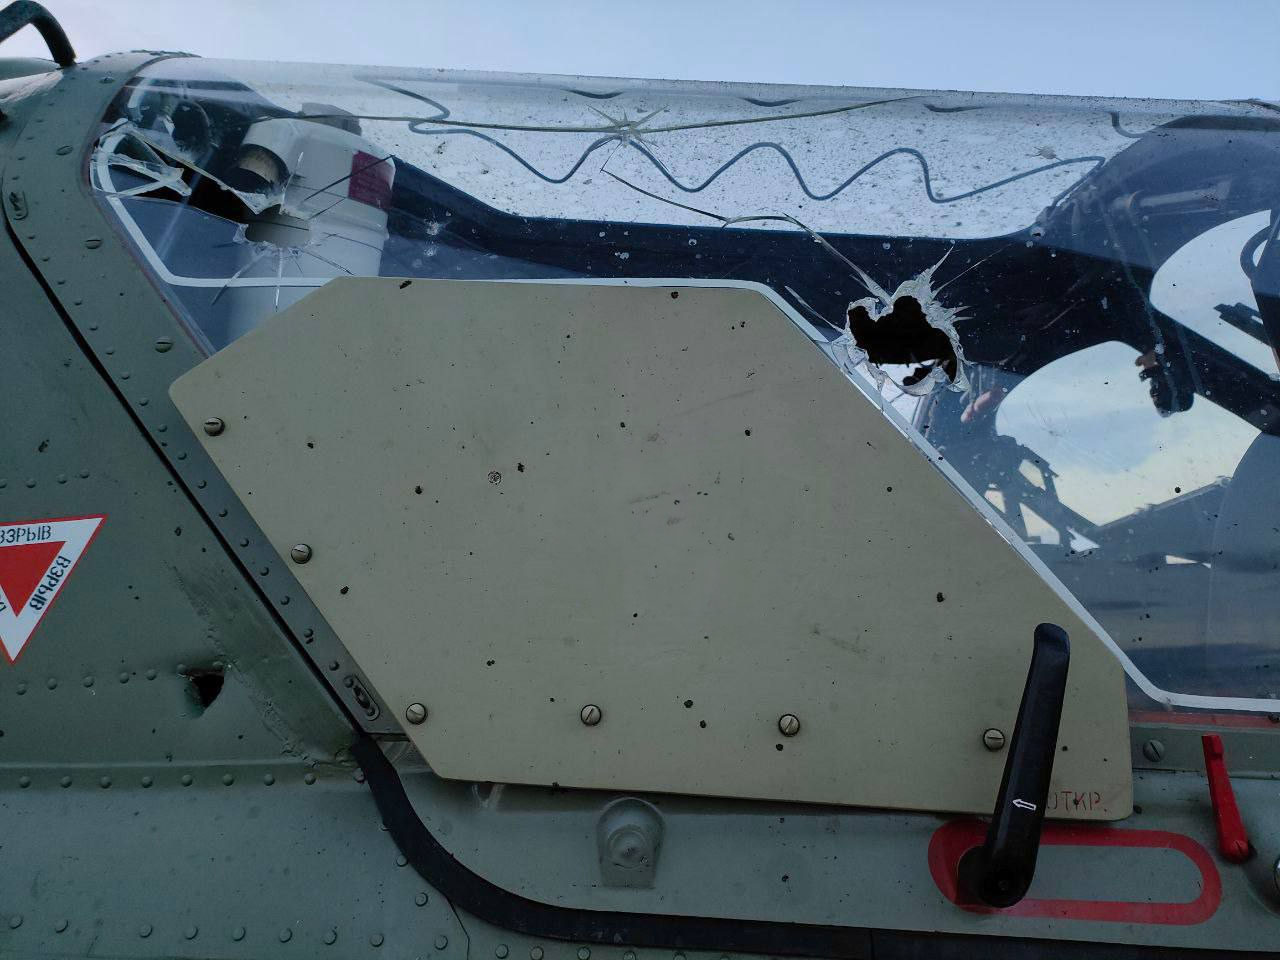 Side view of the pilot's cockpit of Ka-52 after the ATACMS strike